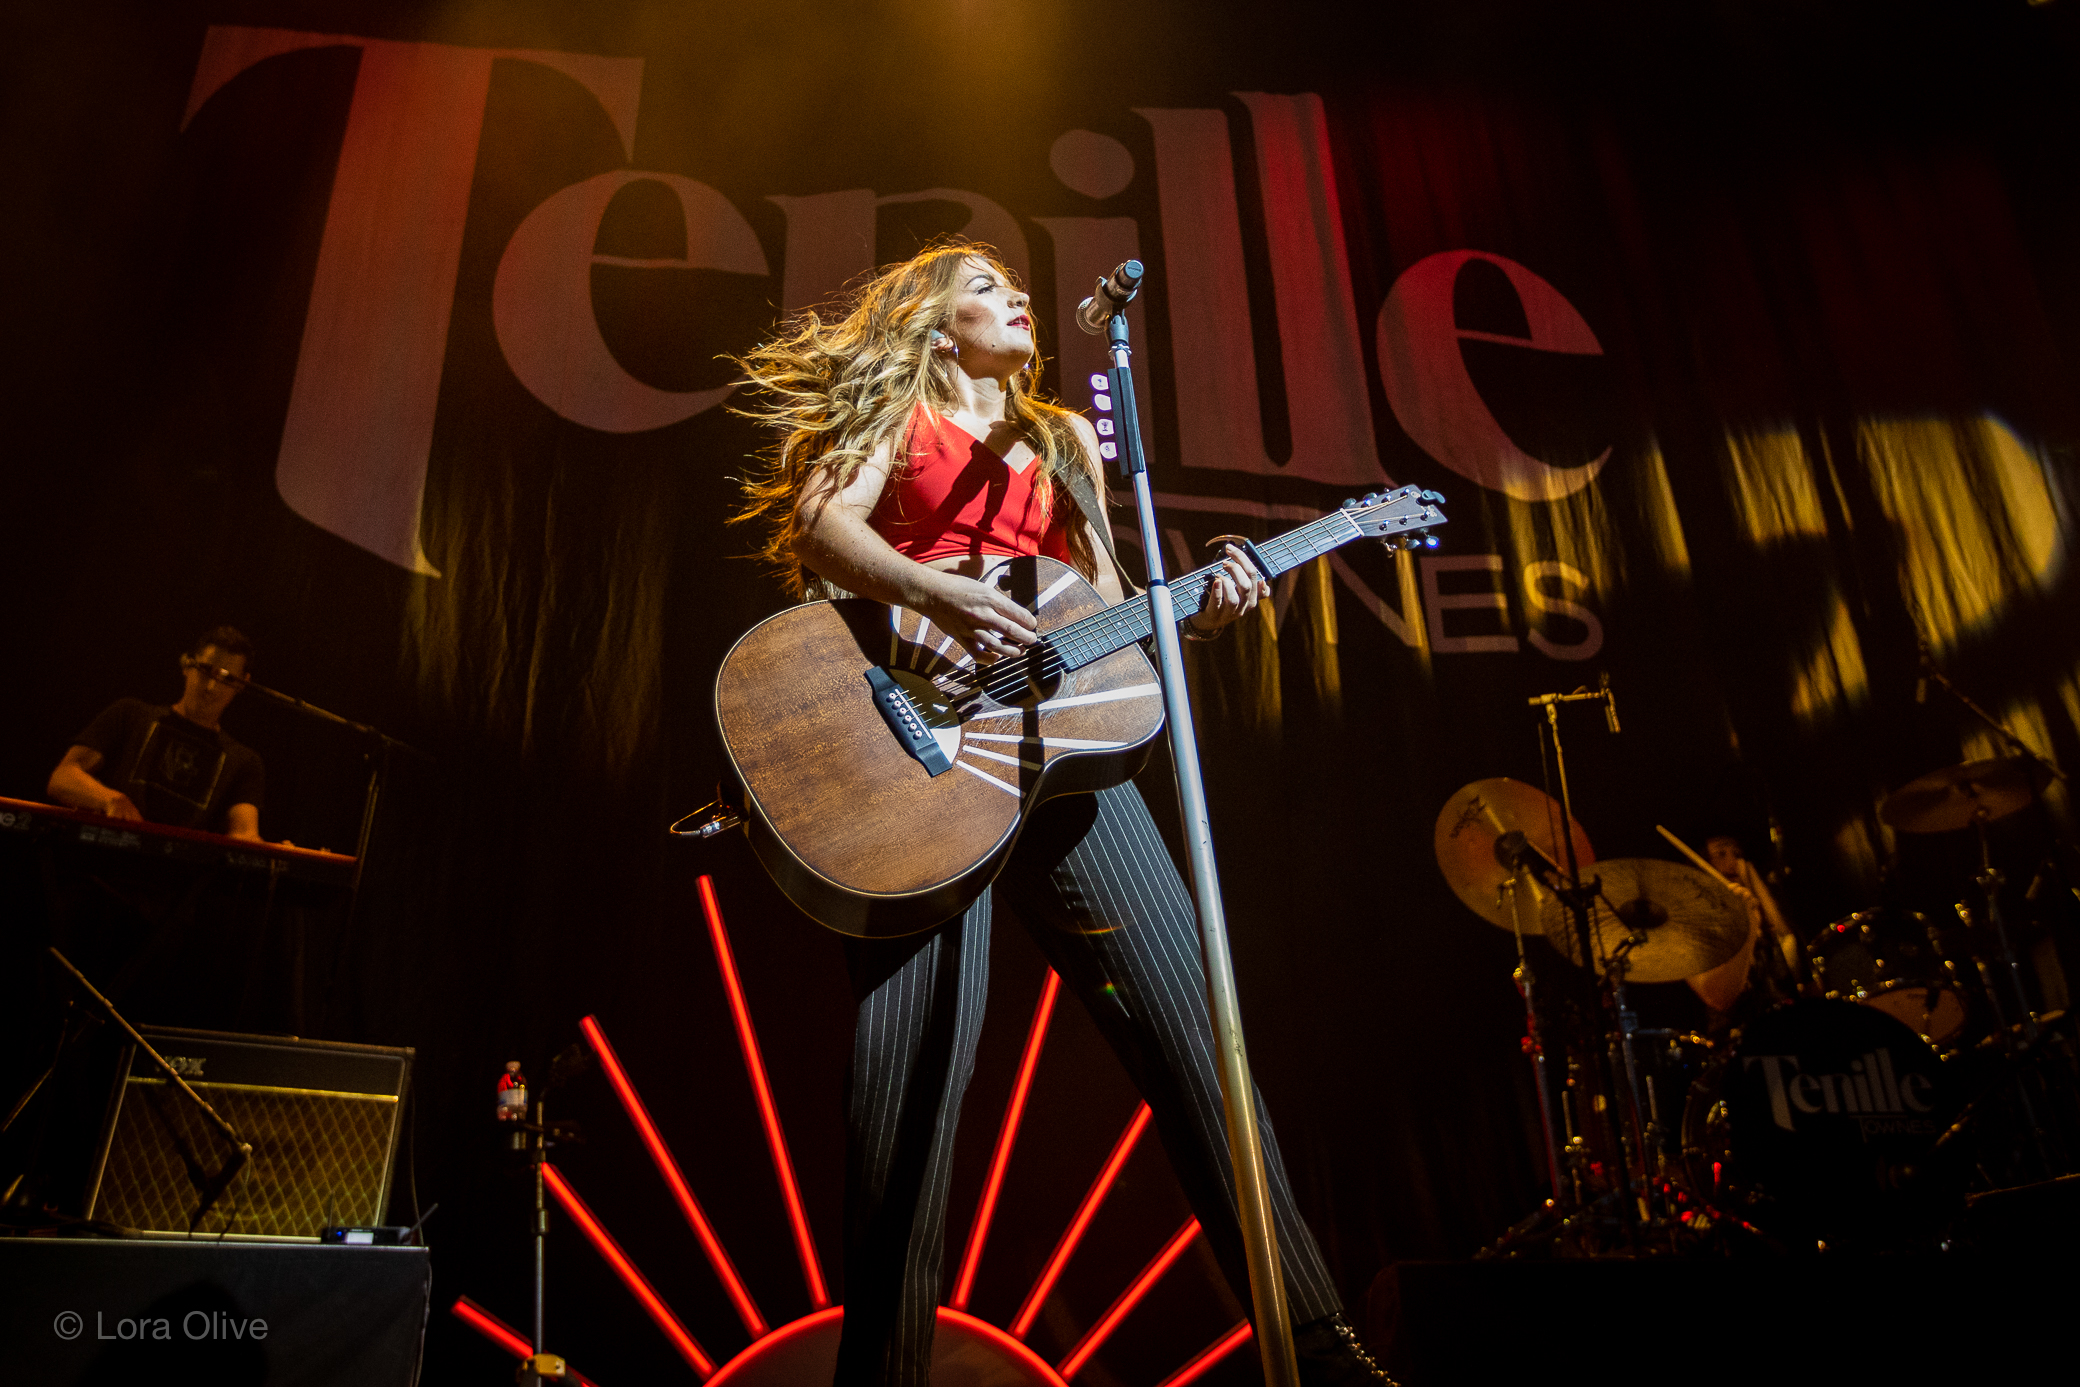 CMA Canadian Artist Tenille Townes Comes to Downtown Indy